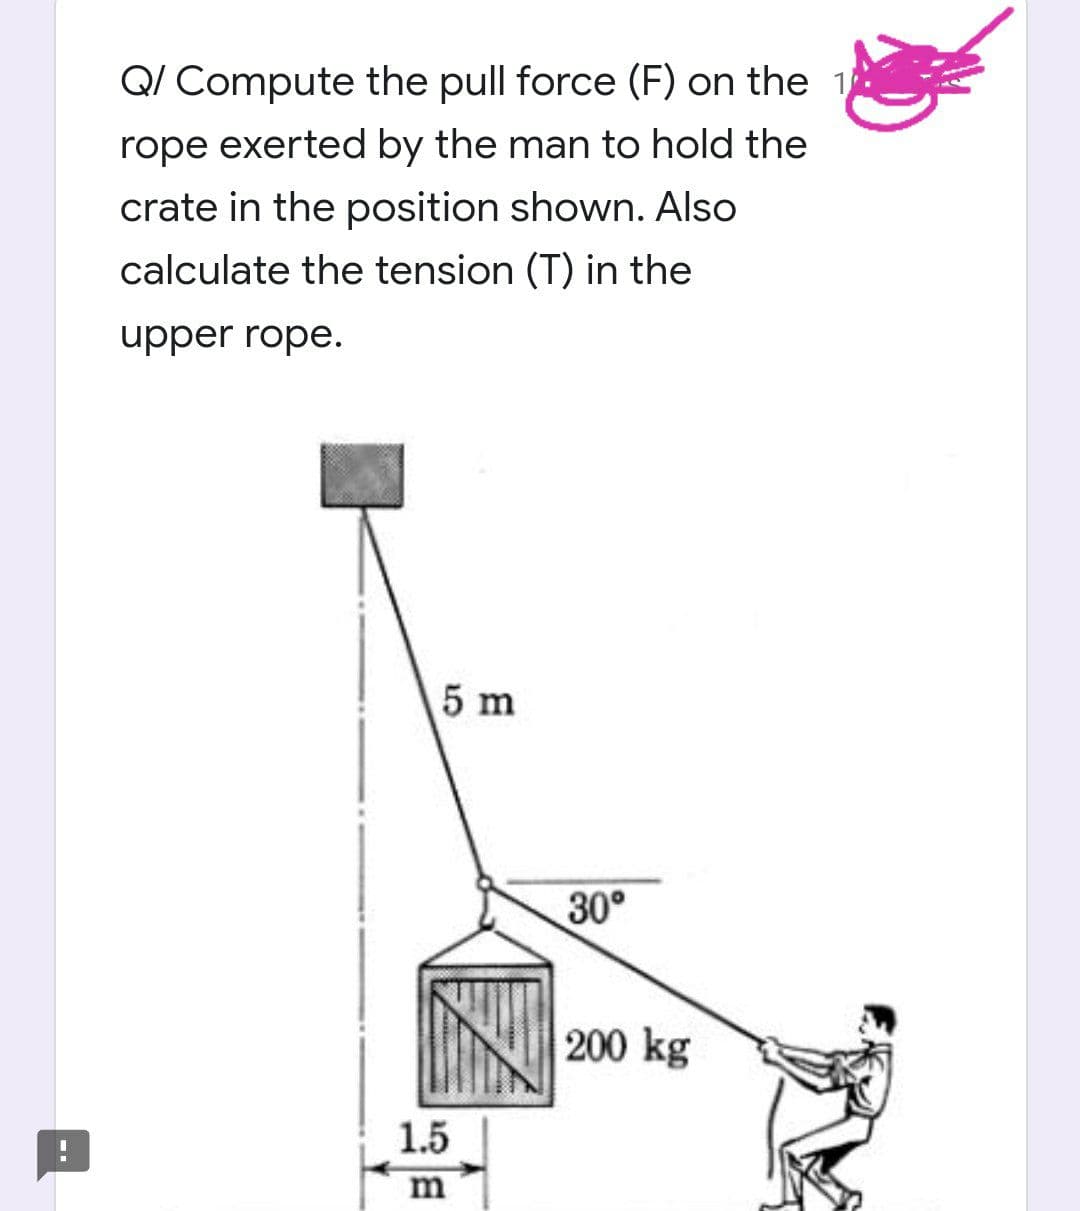 Q/ Compute the pull force (F) on the 1
rope exerted by the man to hold the
crate in the position shown. Also
calculate the tension (T) in the
upper rope.
5 m
1.5
m
30°
200 kg